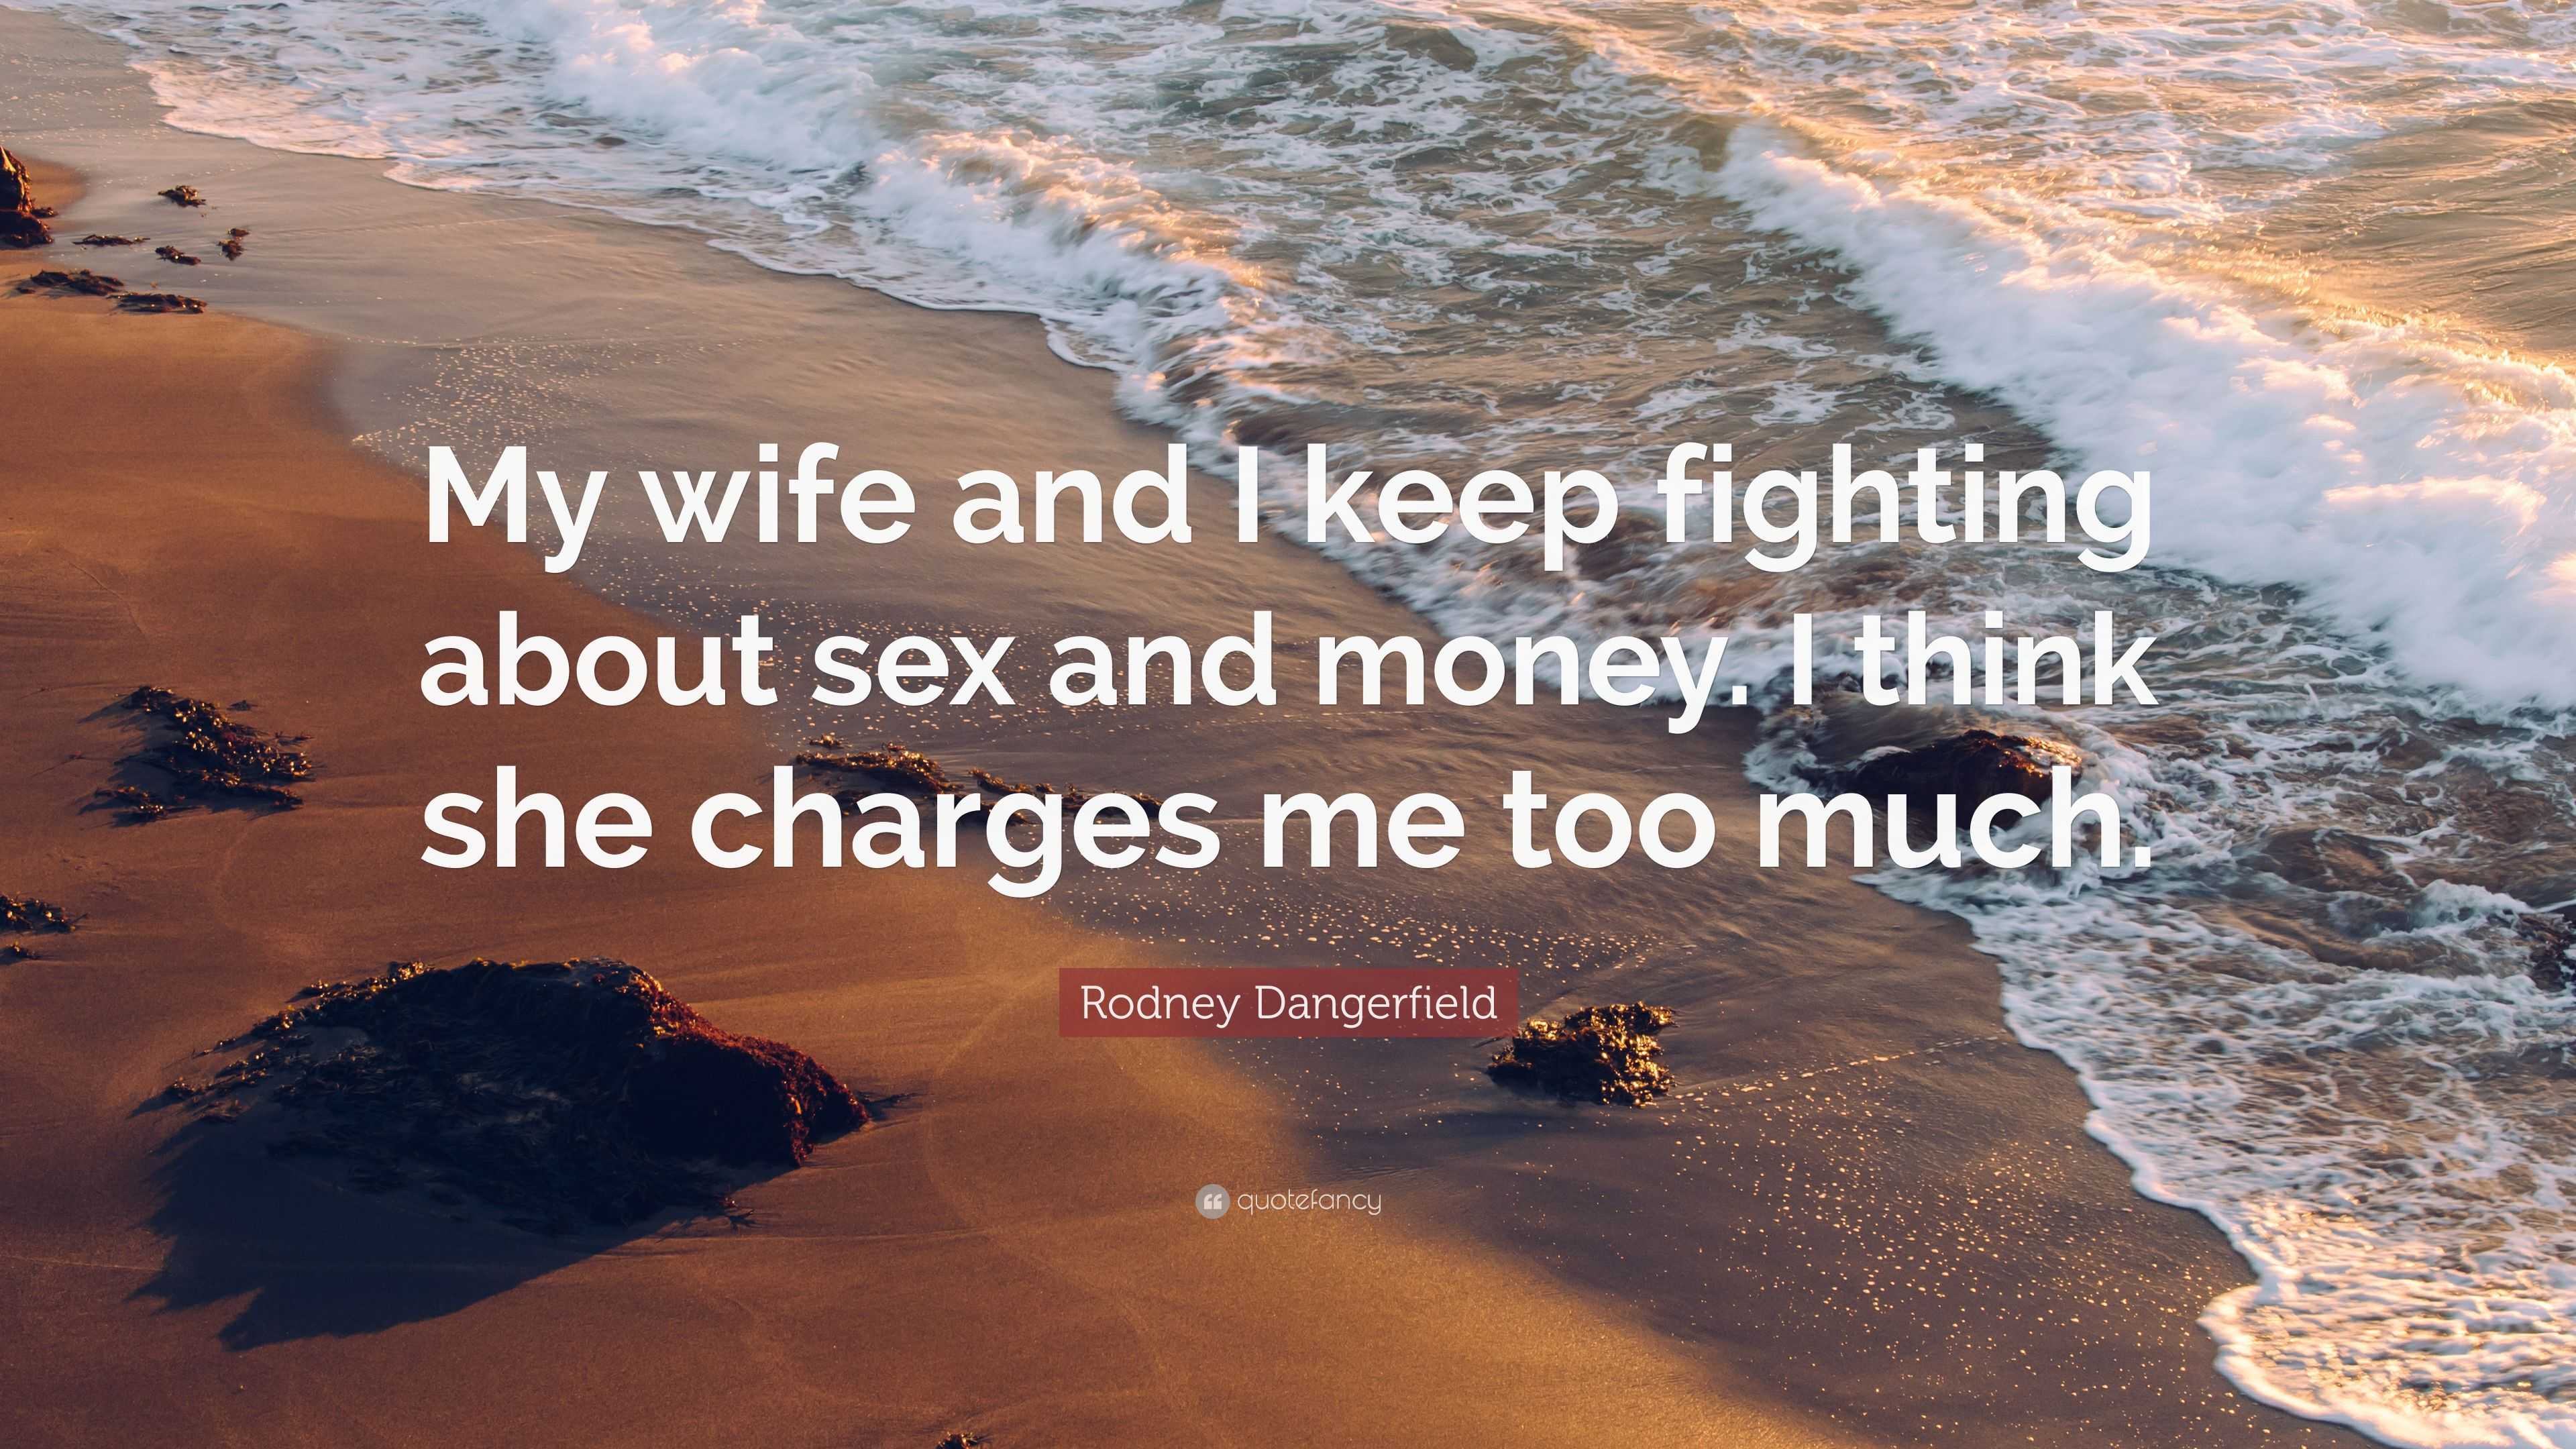 Rodney Dangerfield Quote “My wife and I keep fighting about sex and money hq pic